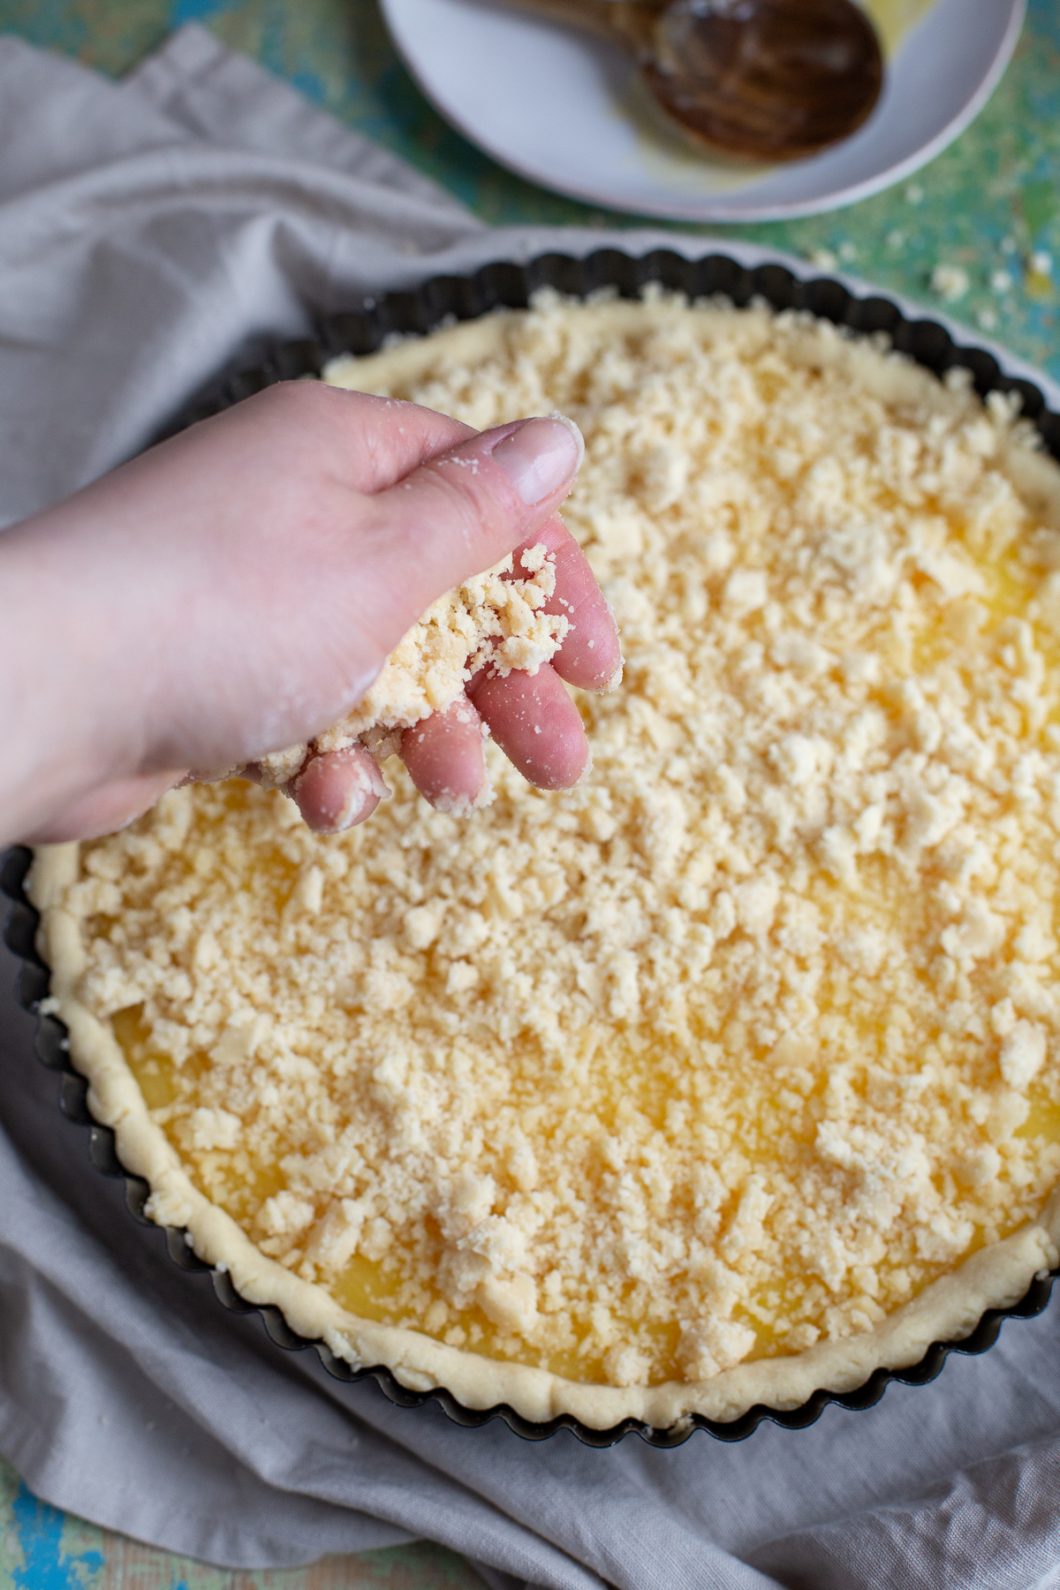 Hand sprinkling pastry crumbles to make streusel topping.